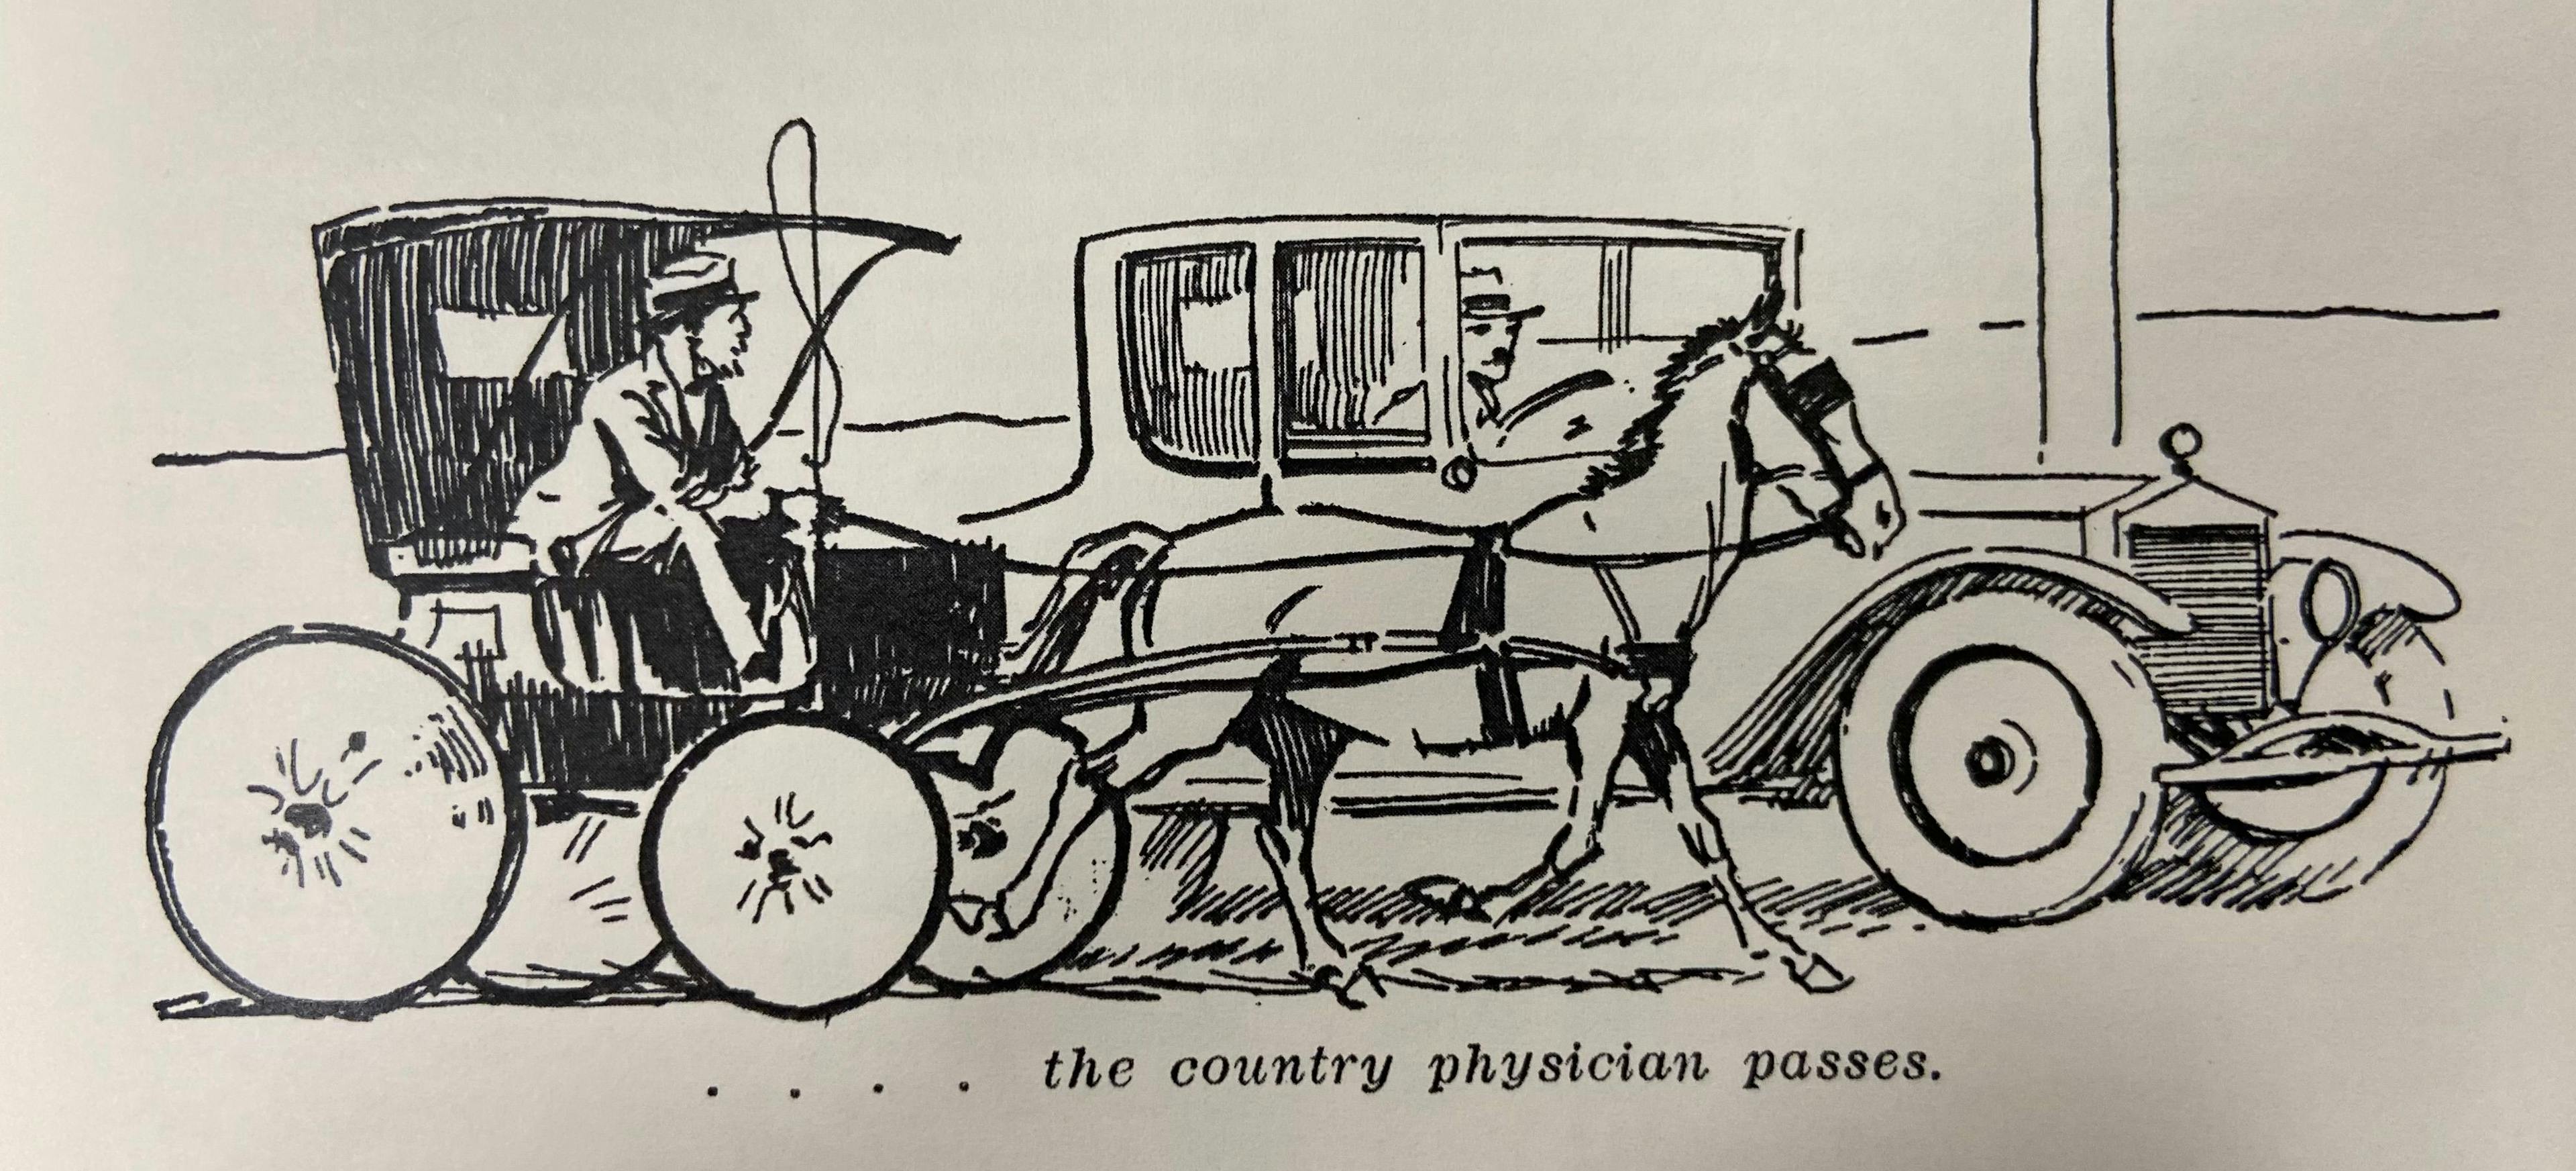 country physician from Medical Economics in 1923